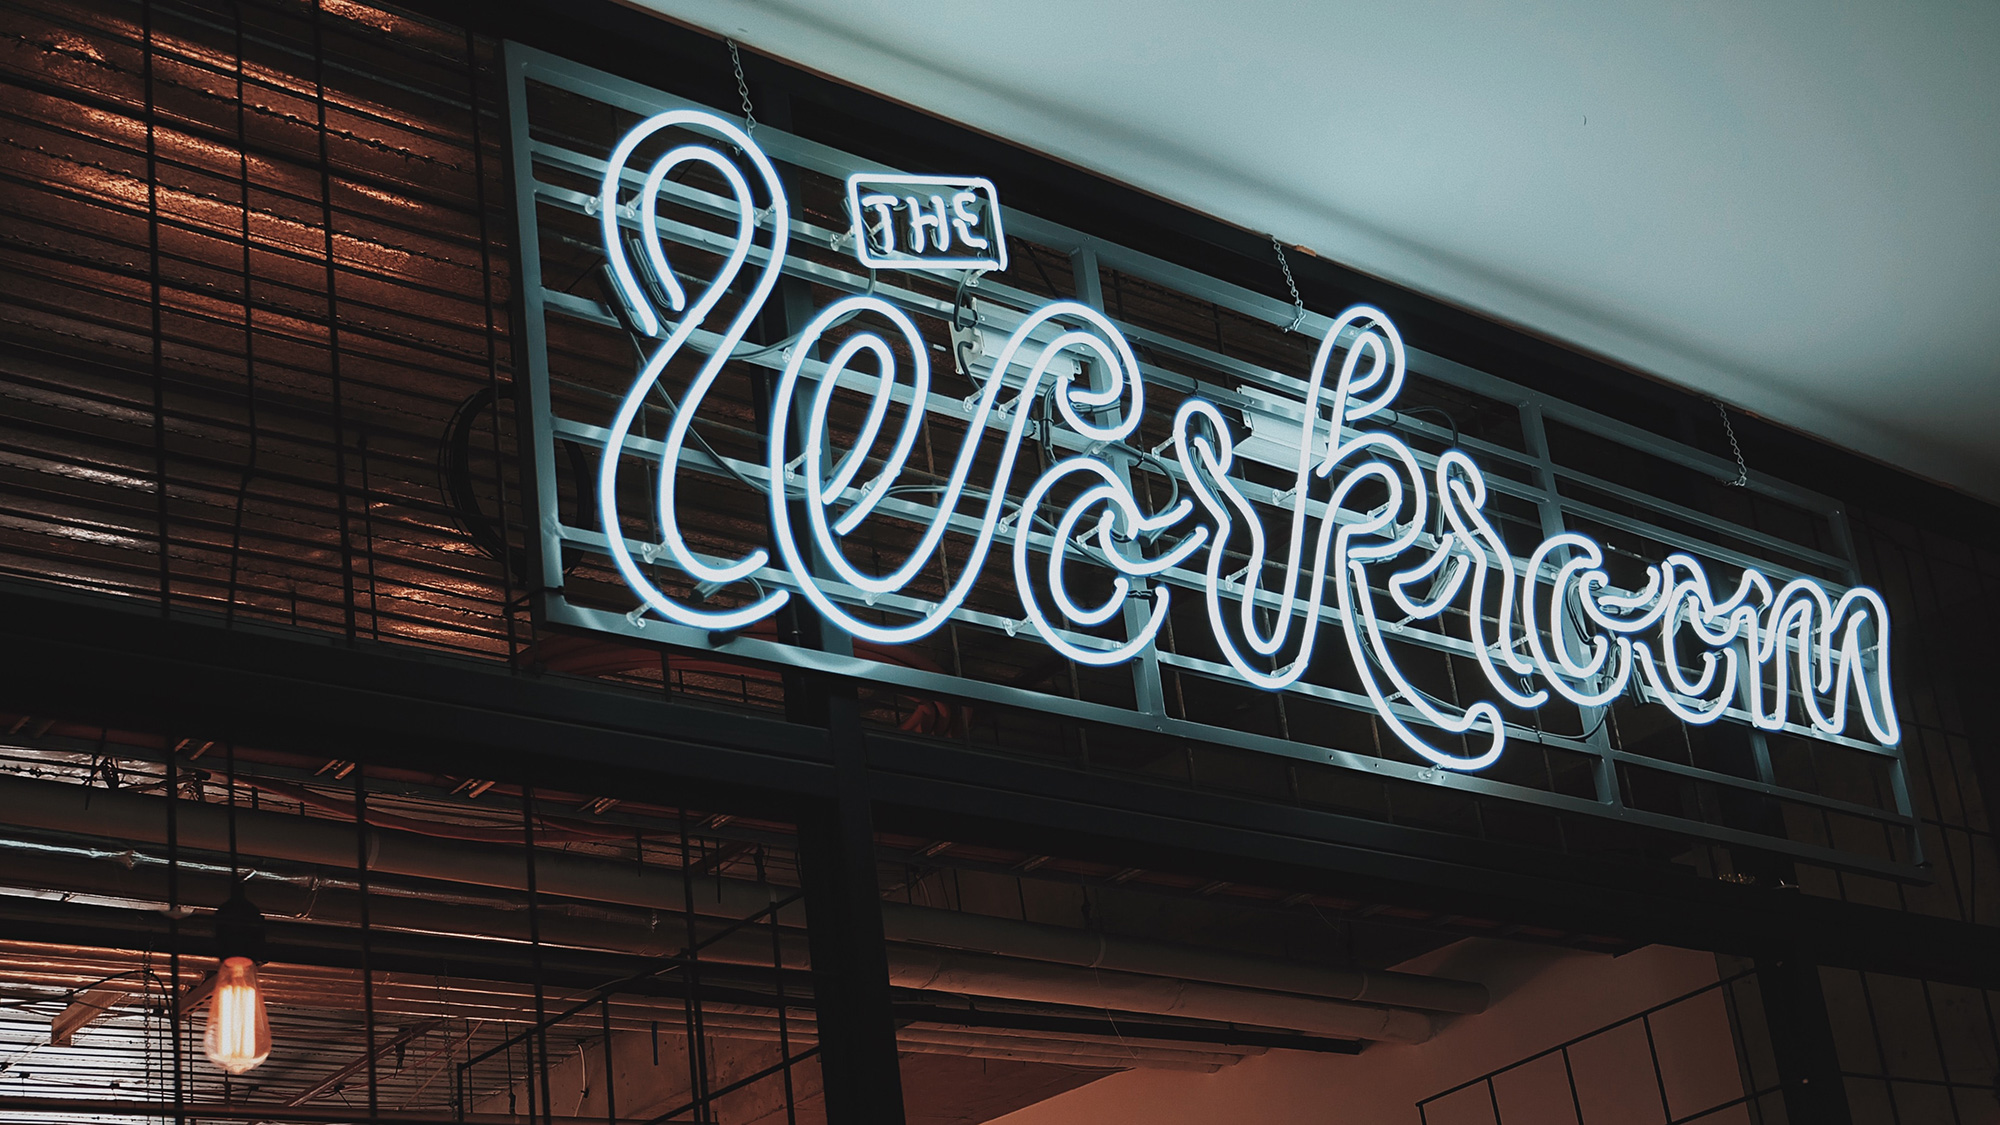 A neon sign that says "The Workroom" above a door